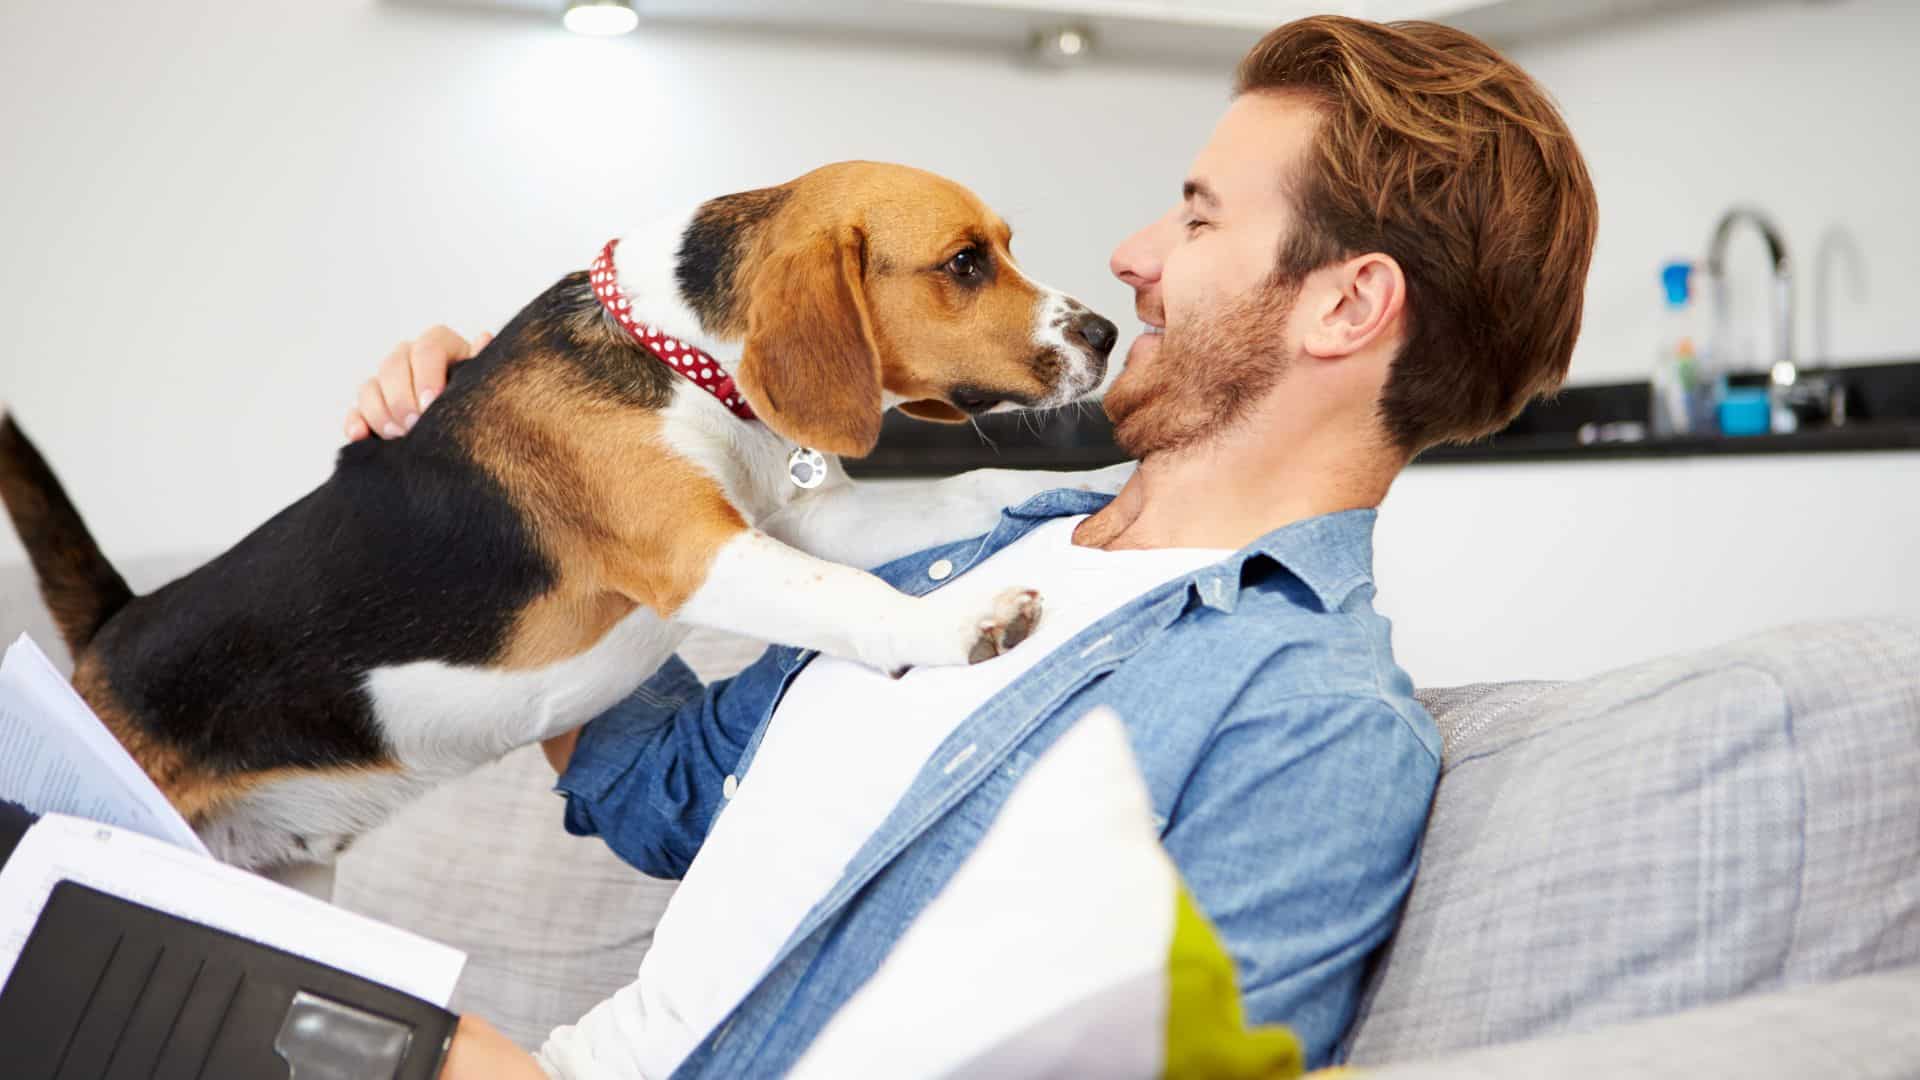 Is pet insurance worth it for dogs?